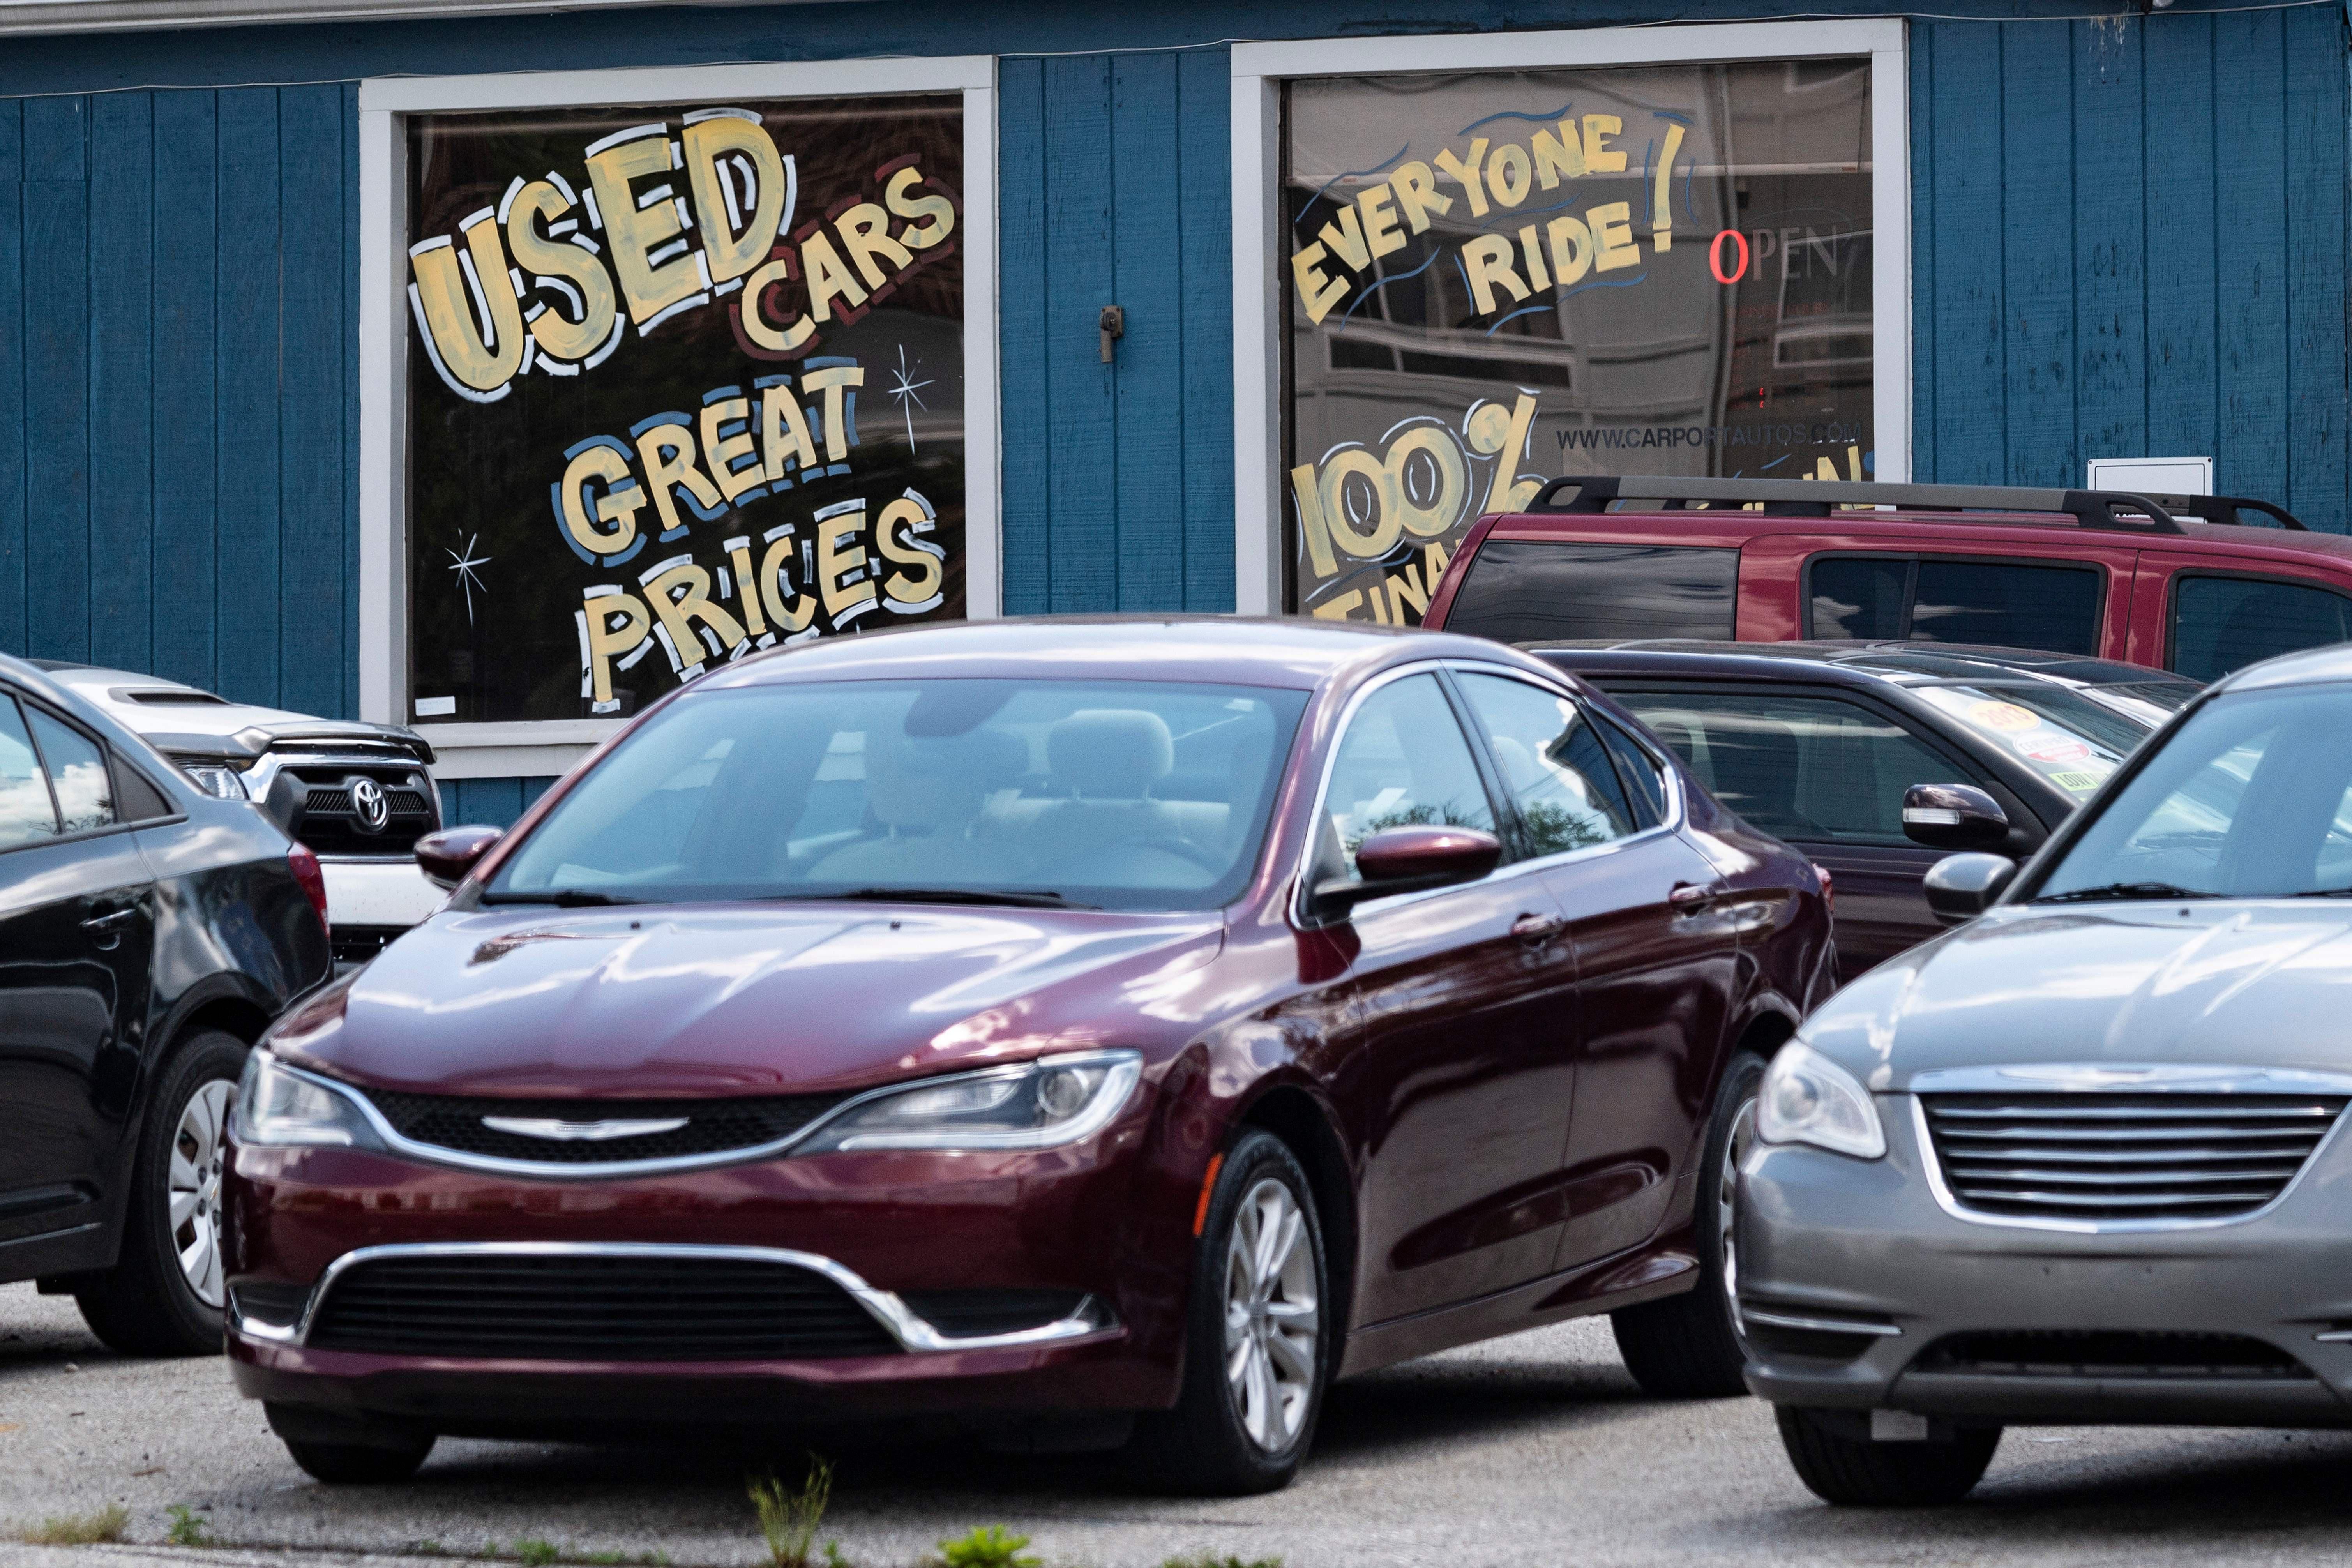 A used car delership is seen in Laurel, Maryland on May 27, 2021, as many car dealerships across the country are running low on new vehicles as a computer chip shortage has caused production at many vehicle manufactures to nearly stop. (Photo by JIM WATSON / AFP) (Photo by JIM WATSON/AFP via Getty Images)